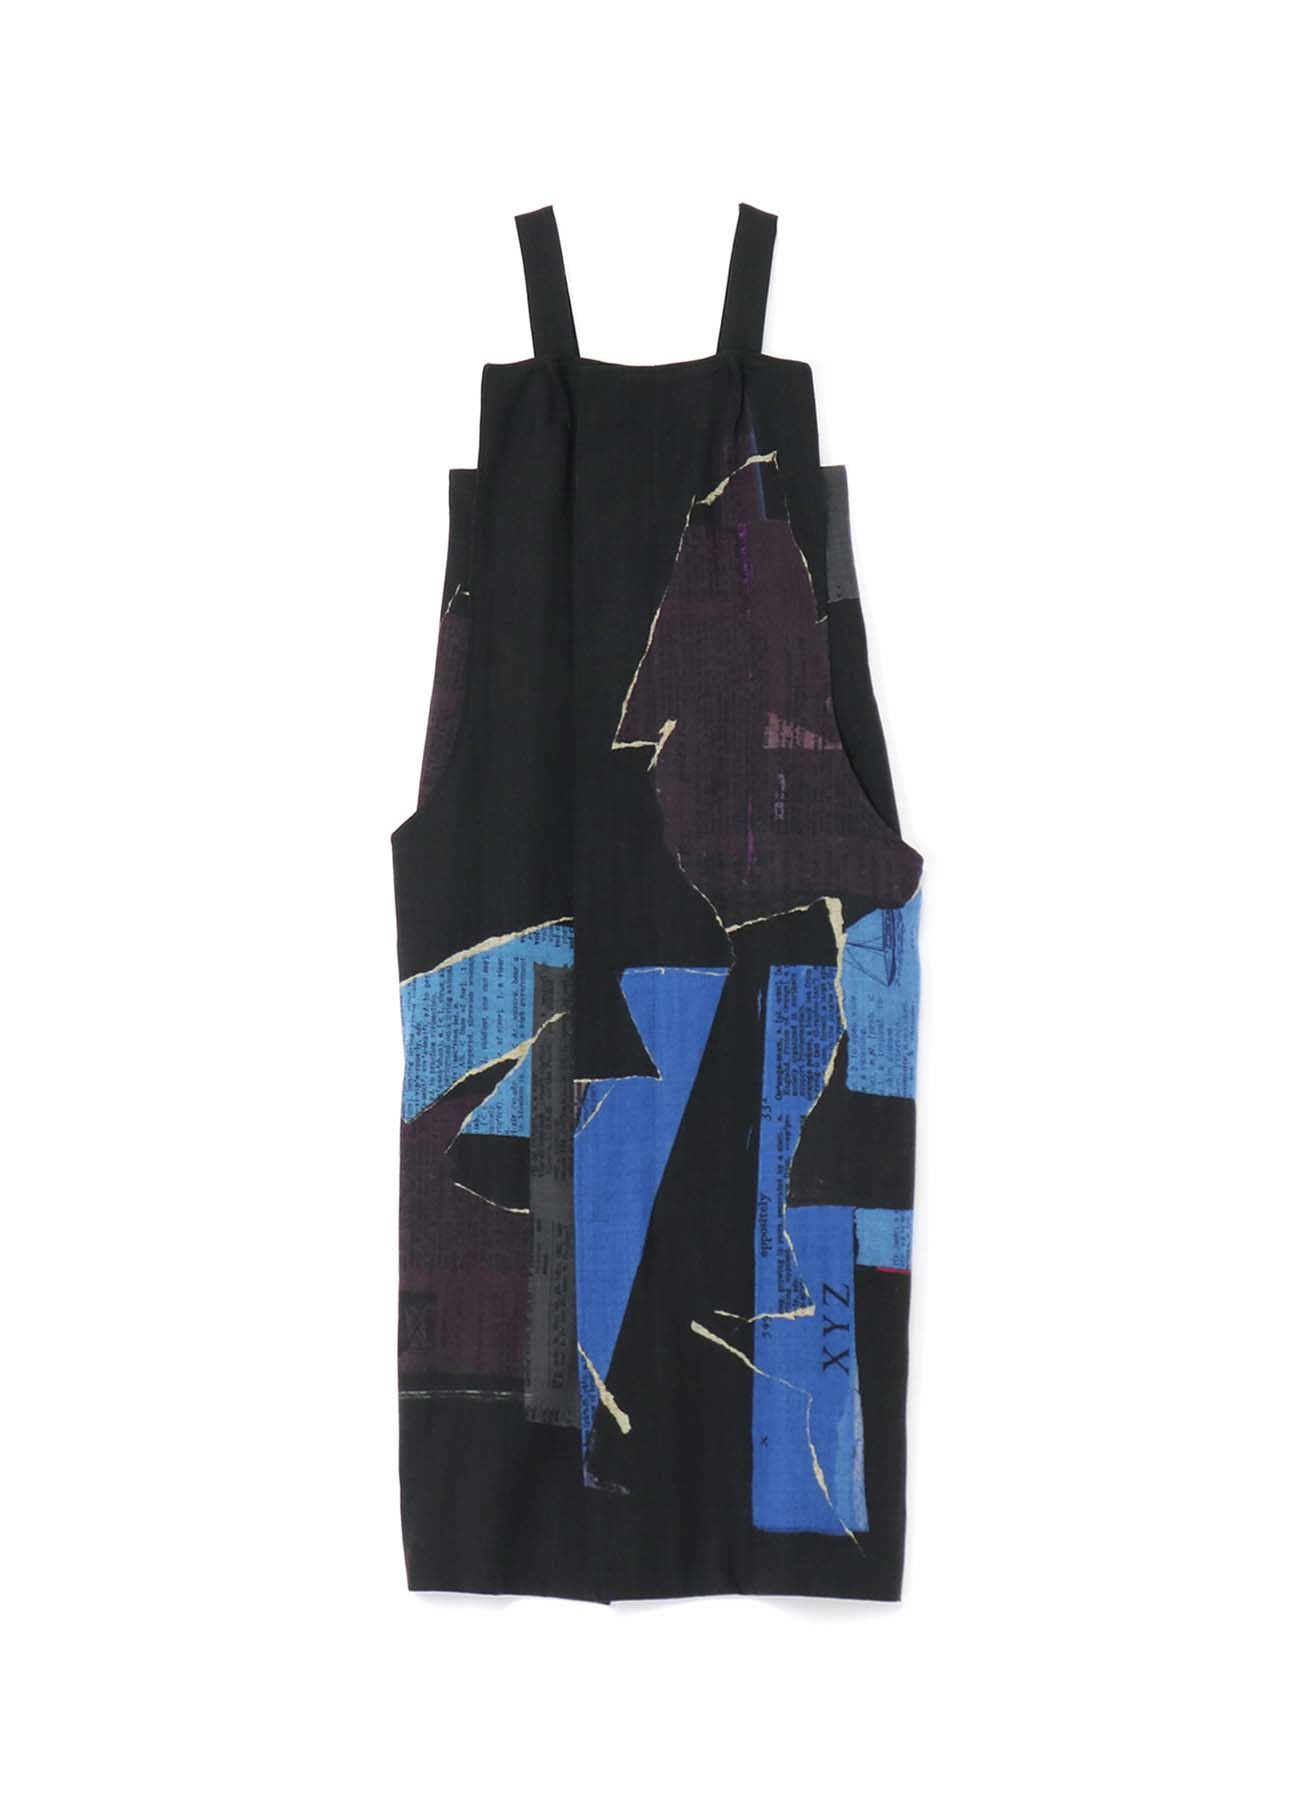 WOOL DICTIONARY COLLAGE PRINT SUSPENDER DRESS